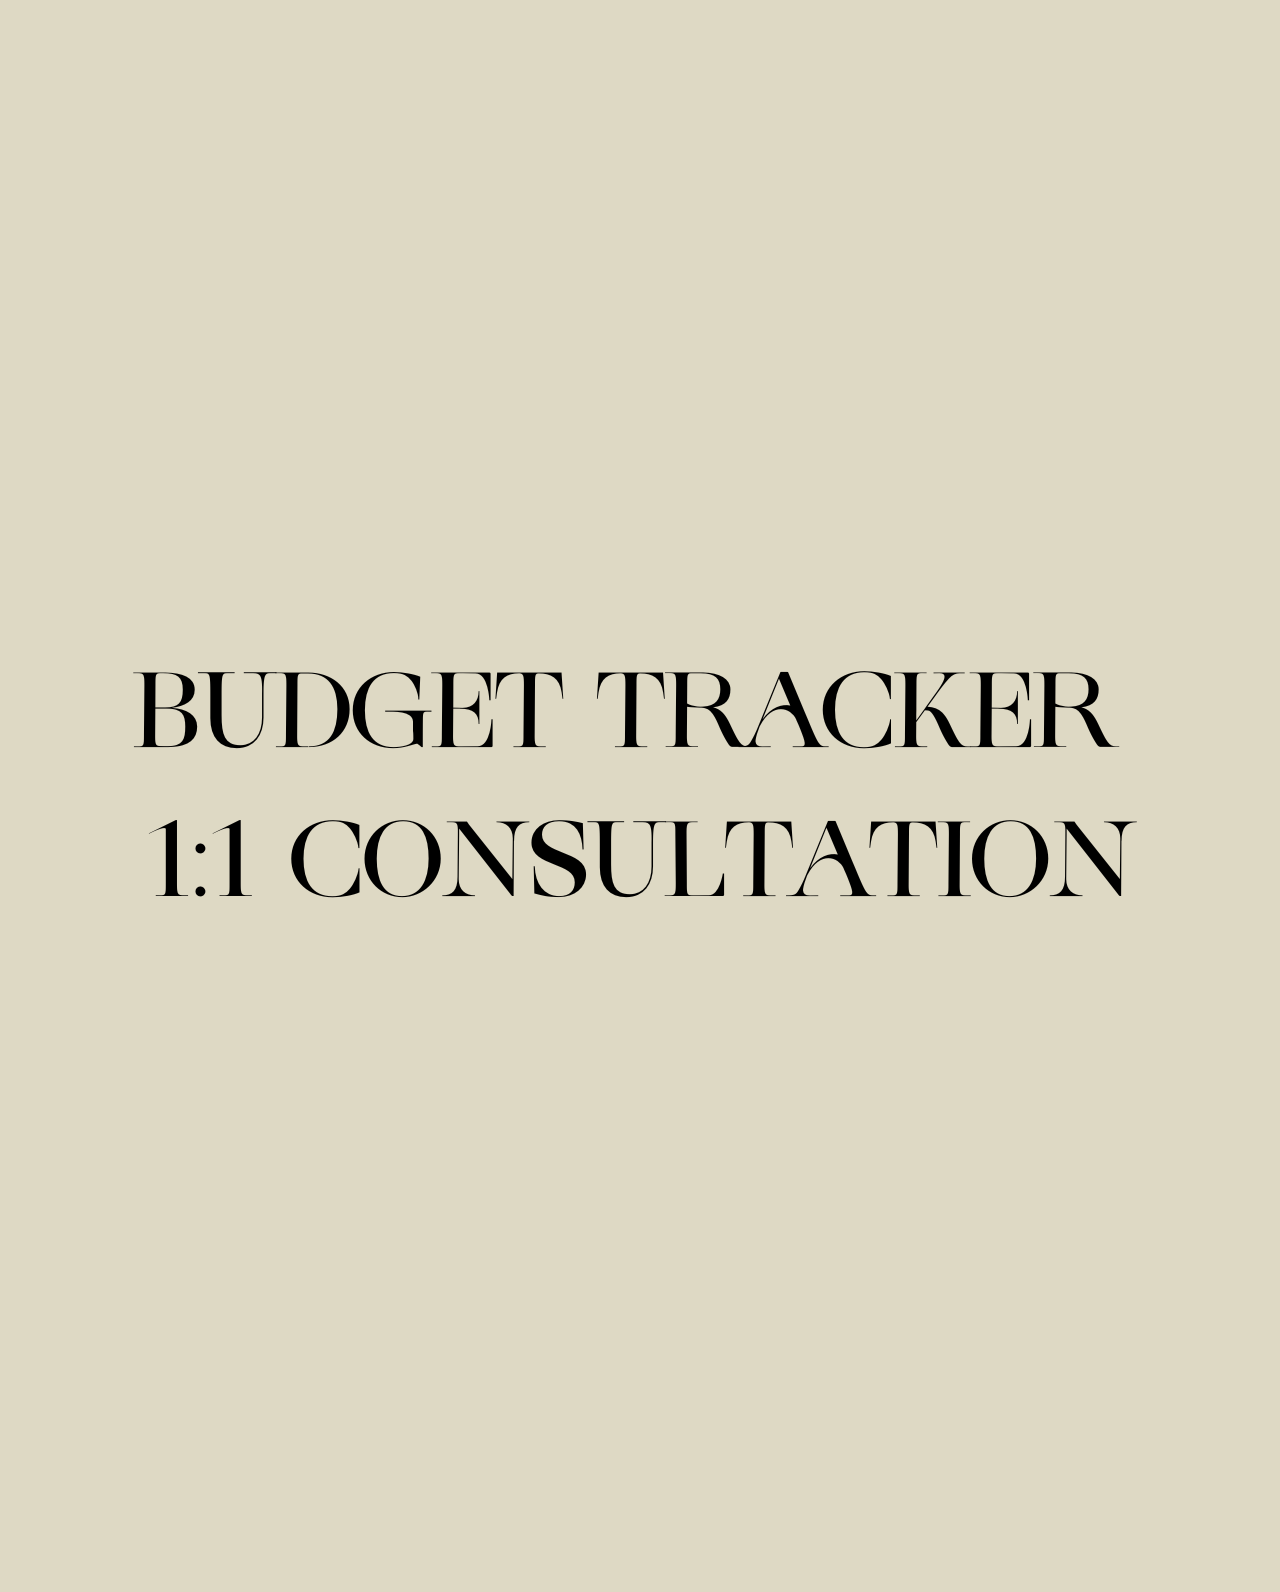 1:1 Consultation | Personal Budget